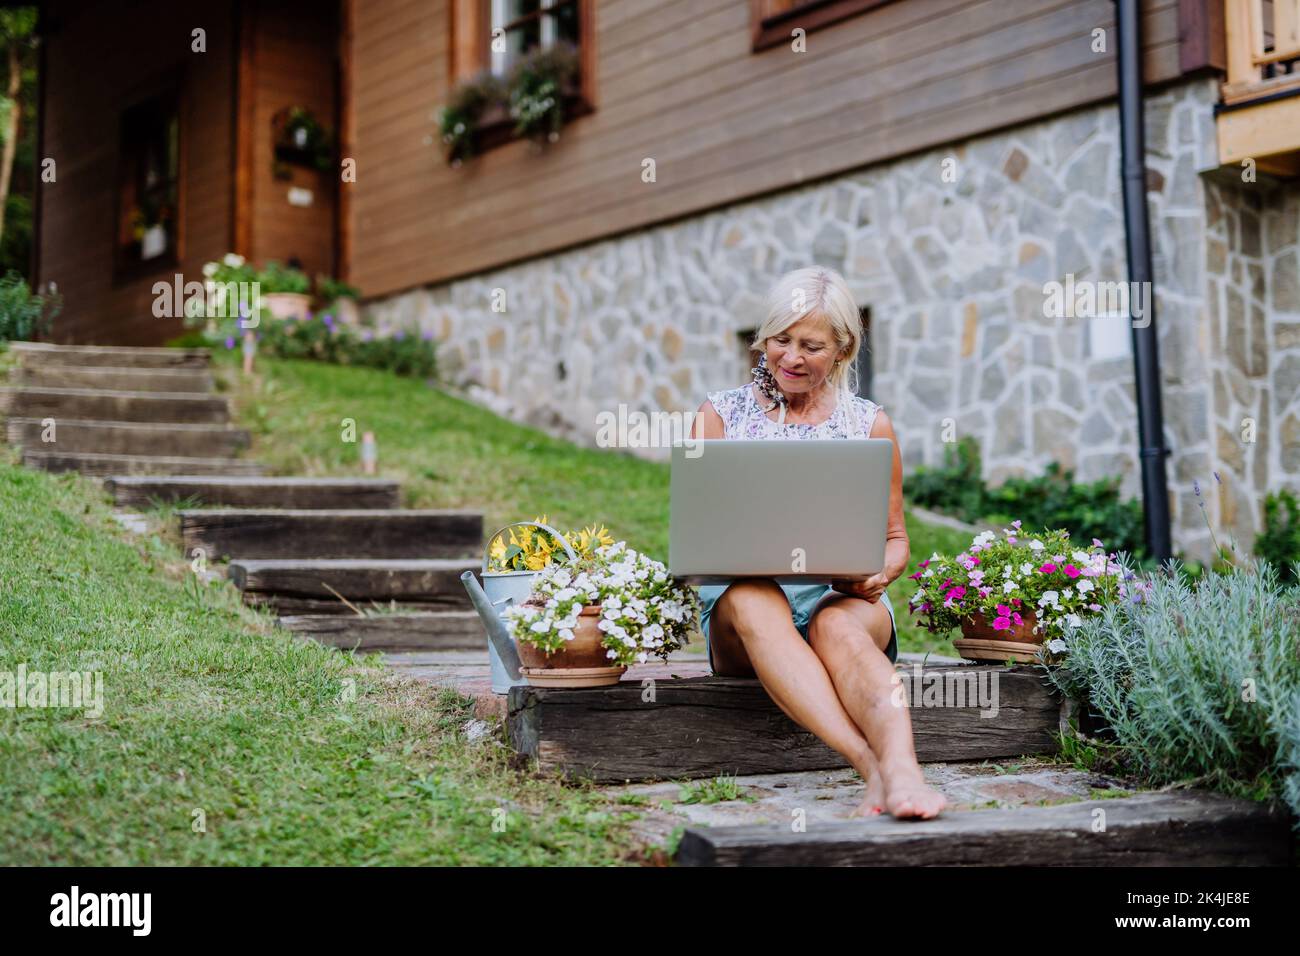 Senior woman using laptop and handling orders of her homegrown organic flowers and vegetables in garden, small business concept. Stock Photo